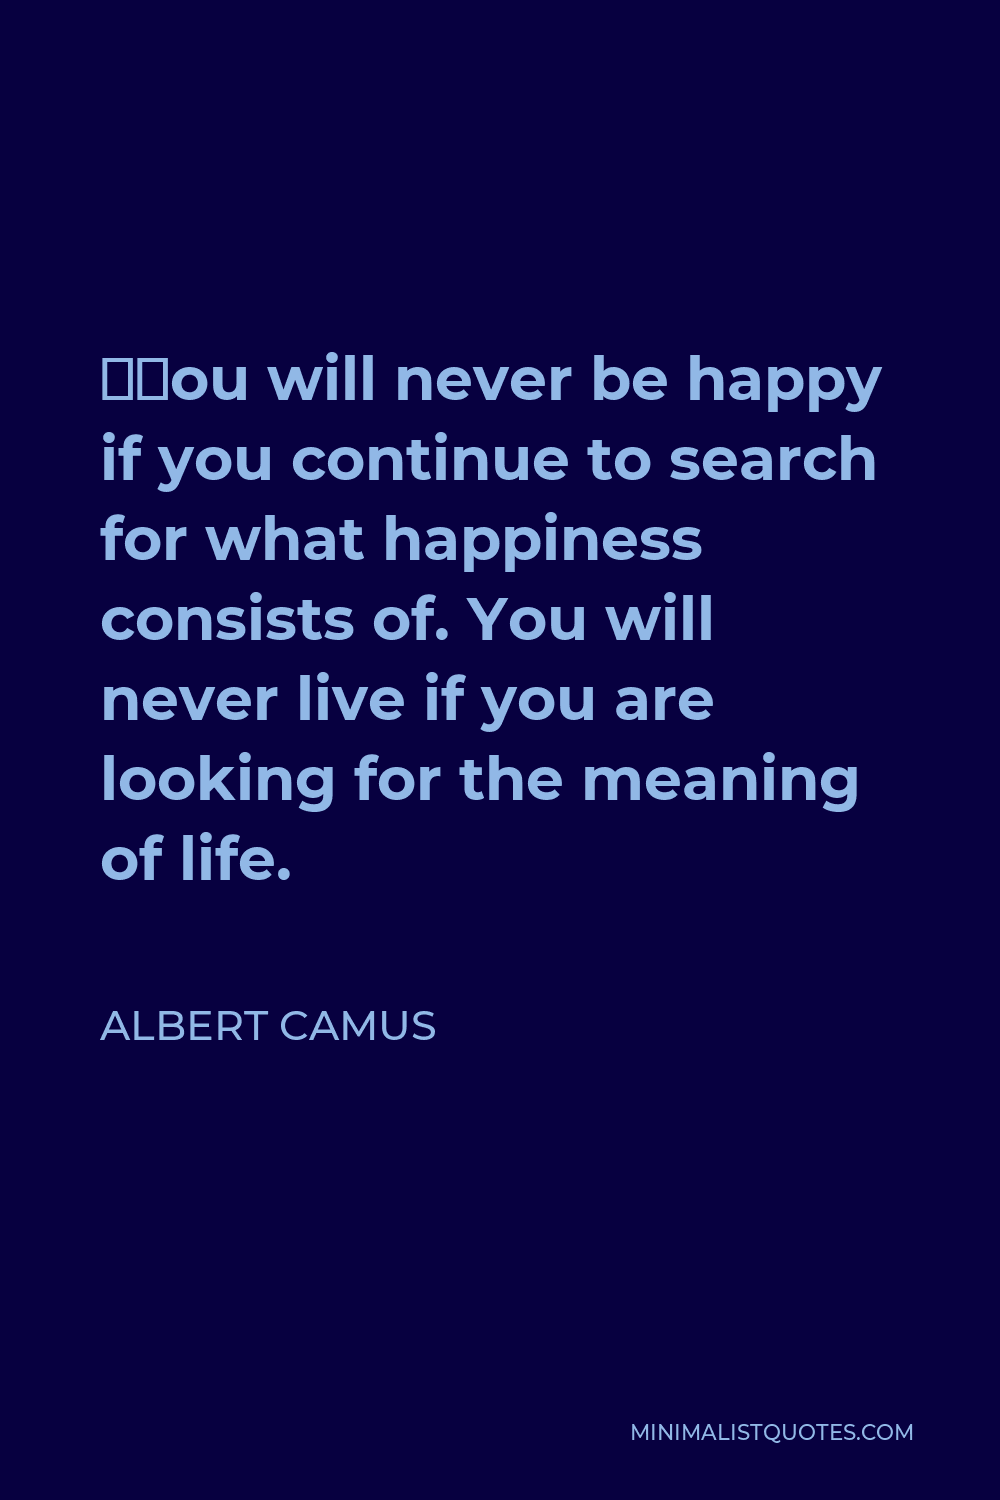 Albert Camus Quote - “You will never be happy if you continue to search for what happiness consists of. You will never live if you are looking for the meaning of life.